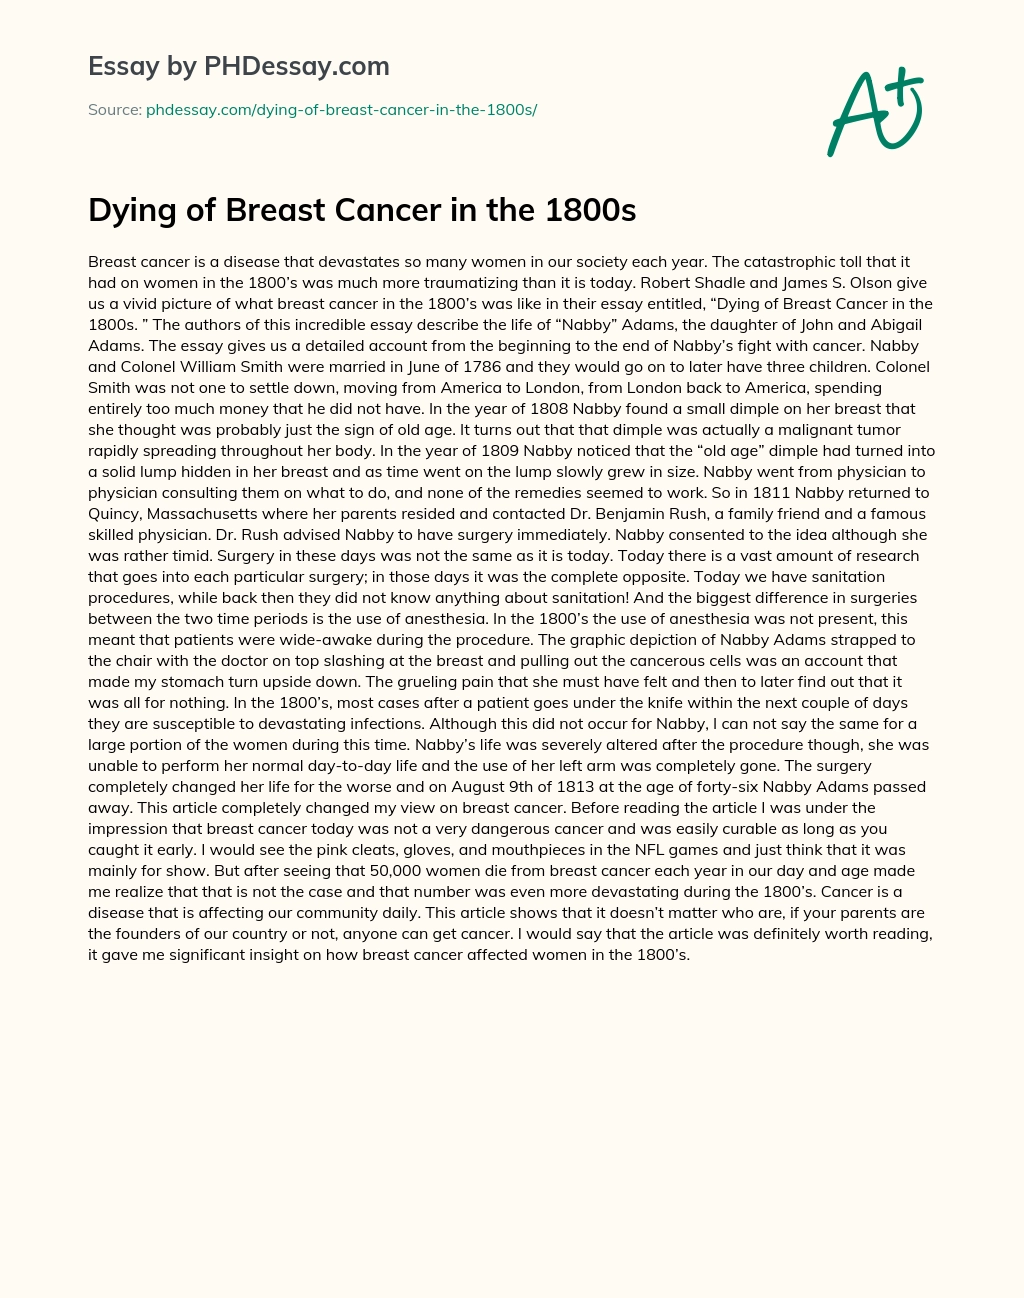 Dying of Breast Cancer in the 1800s essay